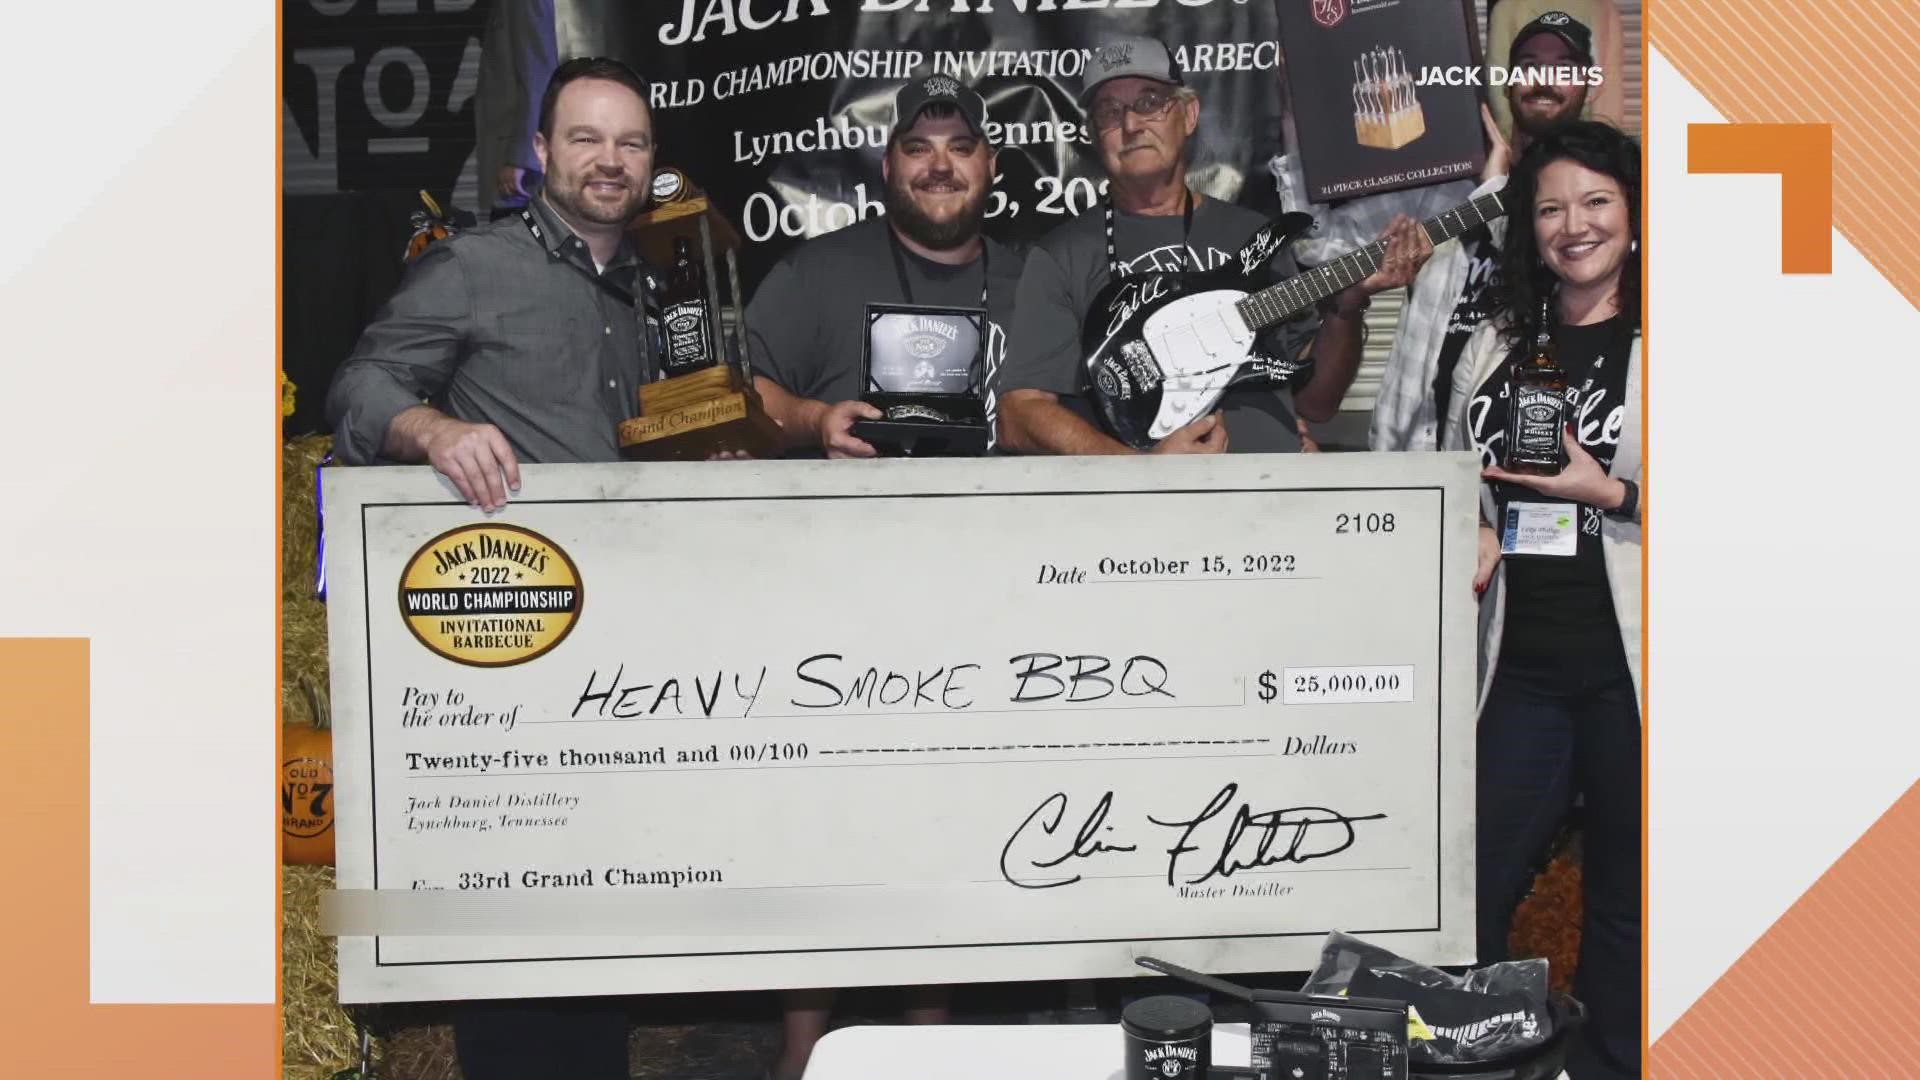 The team at Heavy Smoke BBQ in St. Peters was named Grand Champion at the 2022 Jack Daniel's competition.